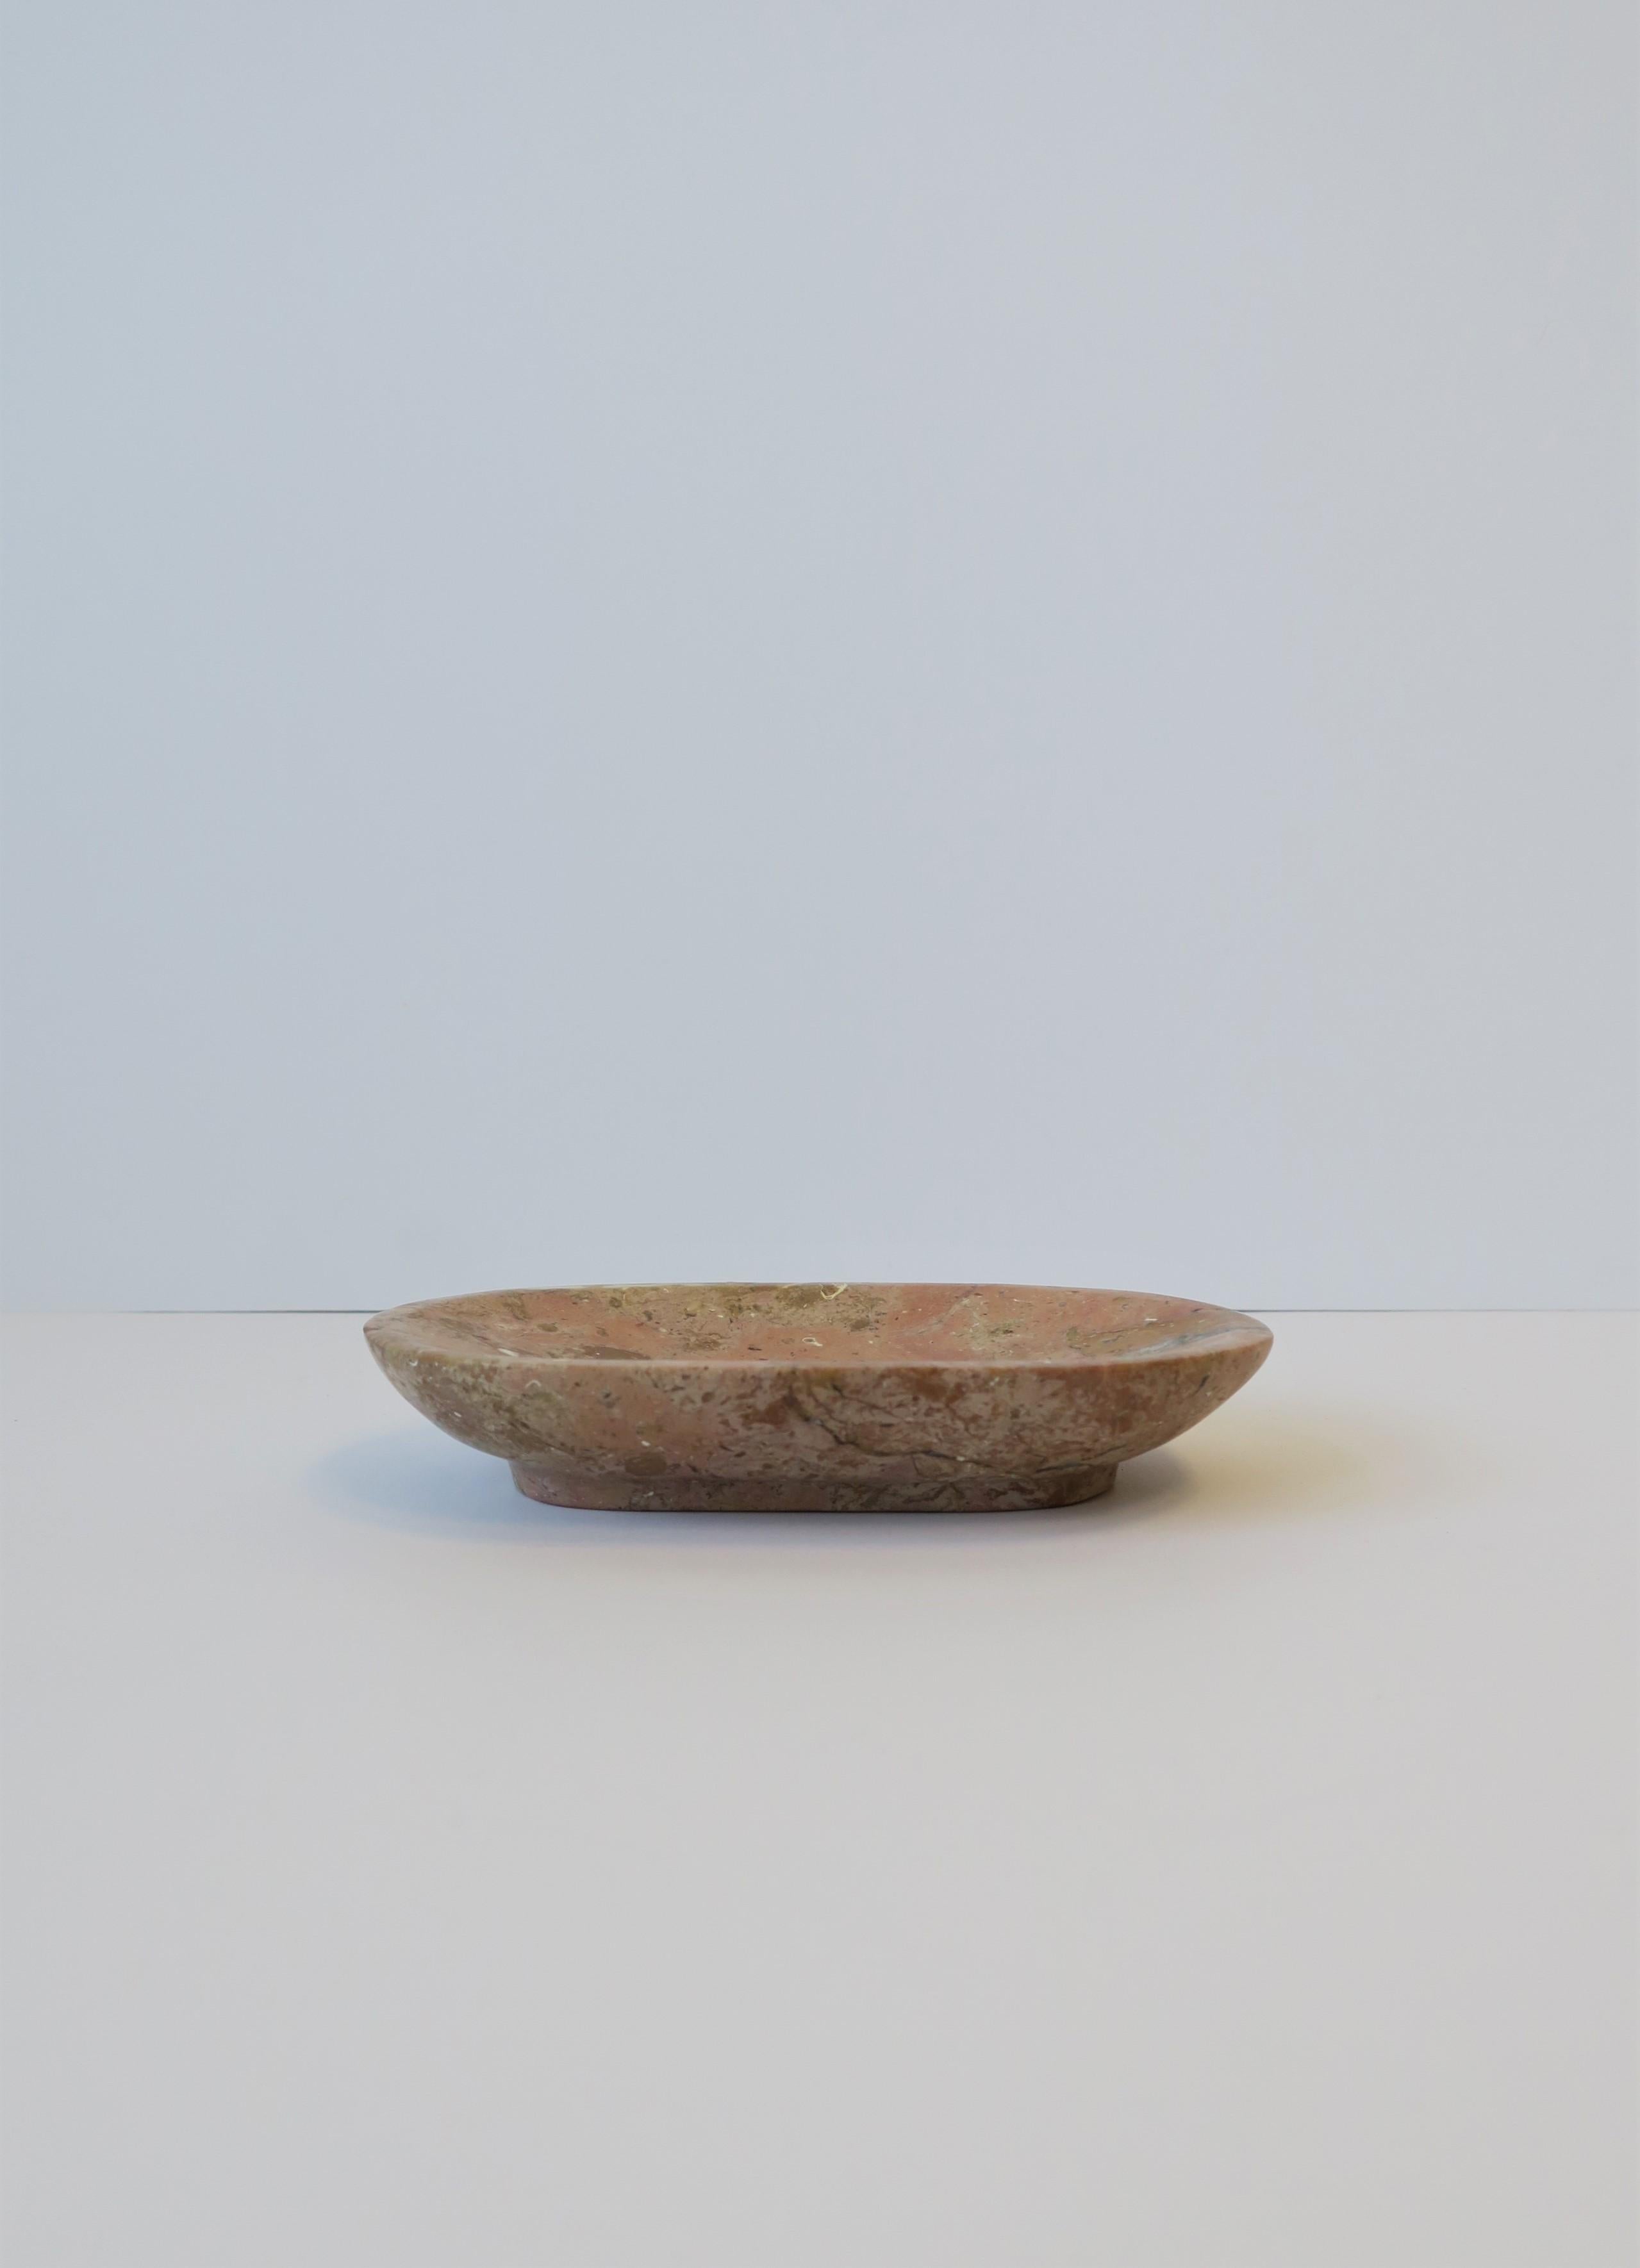 A substantial oval marble multicolored soap dish. Colors included flesh-tones/pink, tan, off-white and a touch of dark grey. 

Piece measures: 3.88